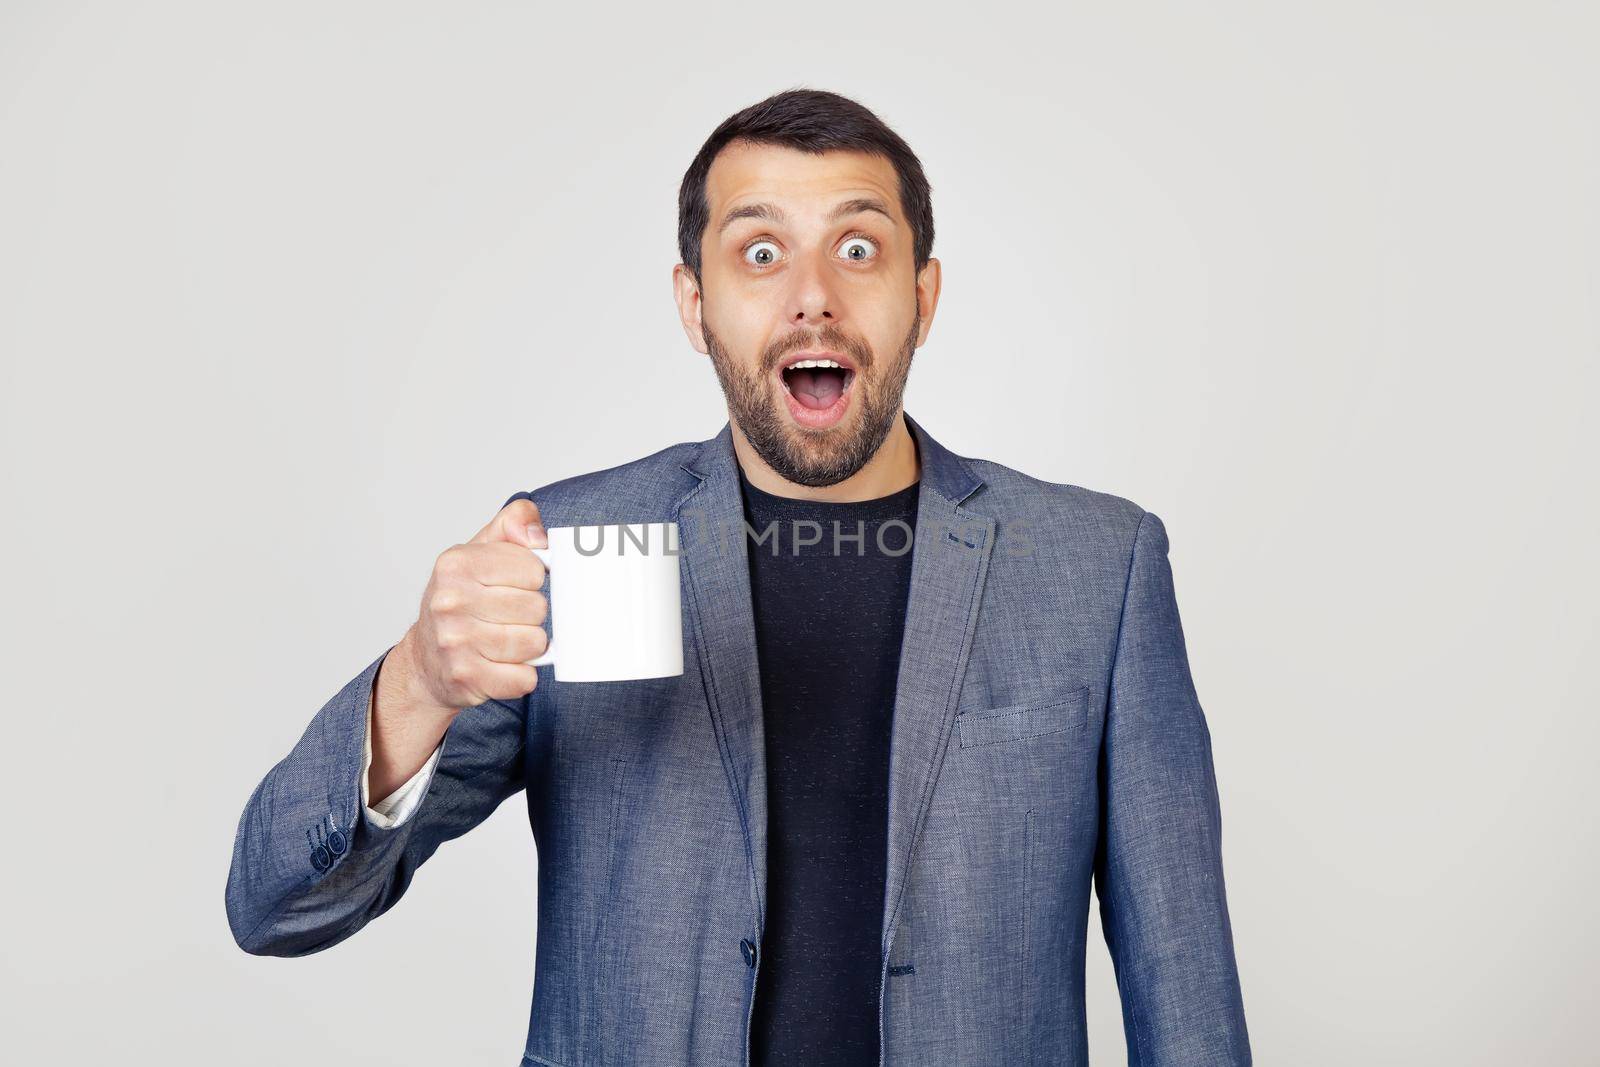 Young businessman man with a beard in a jacket, holding a cup of coffee, scared in shock with a surprised face, scared and excited with an expression of fear. Portrait of a man on a gray background.